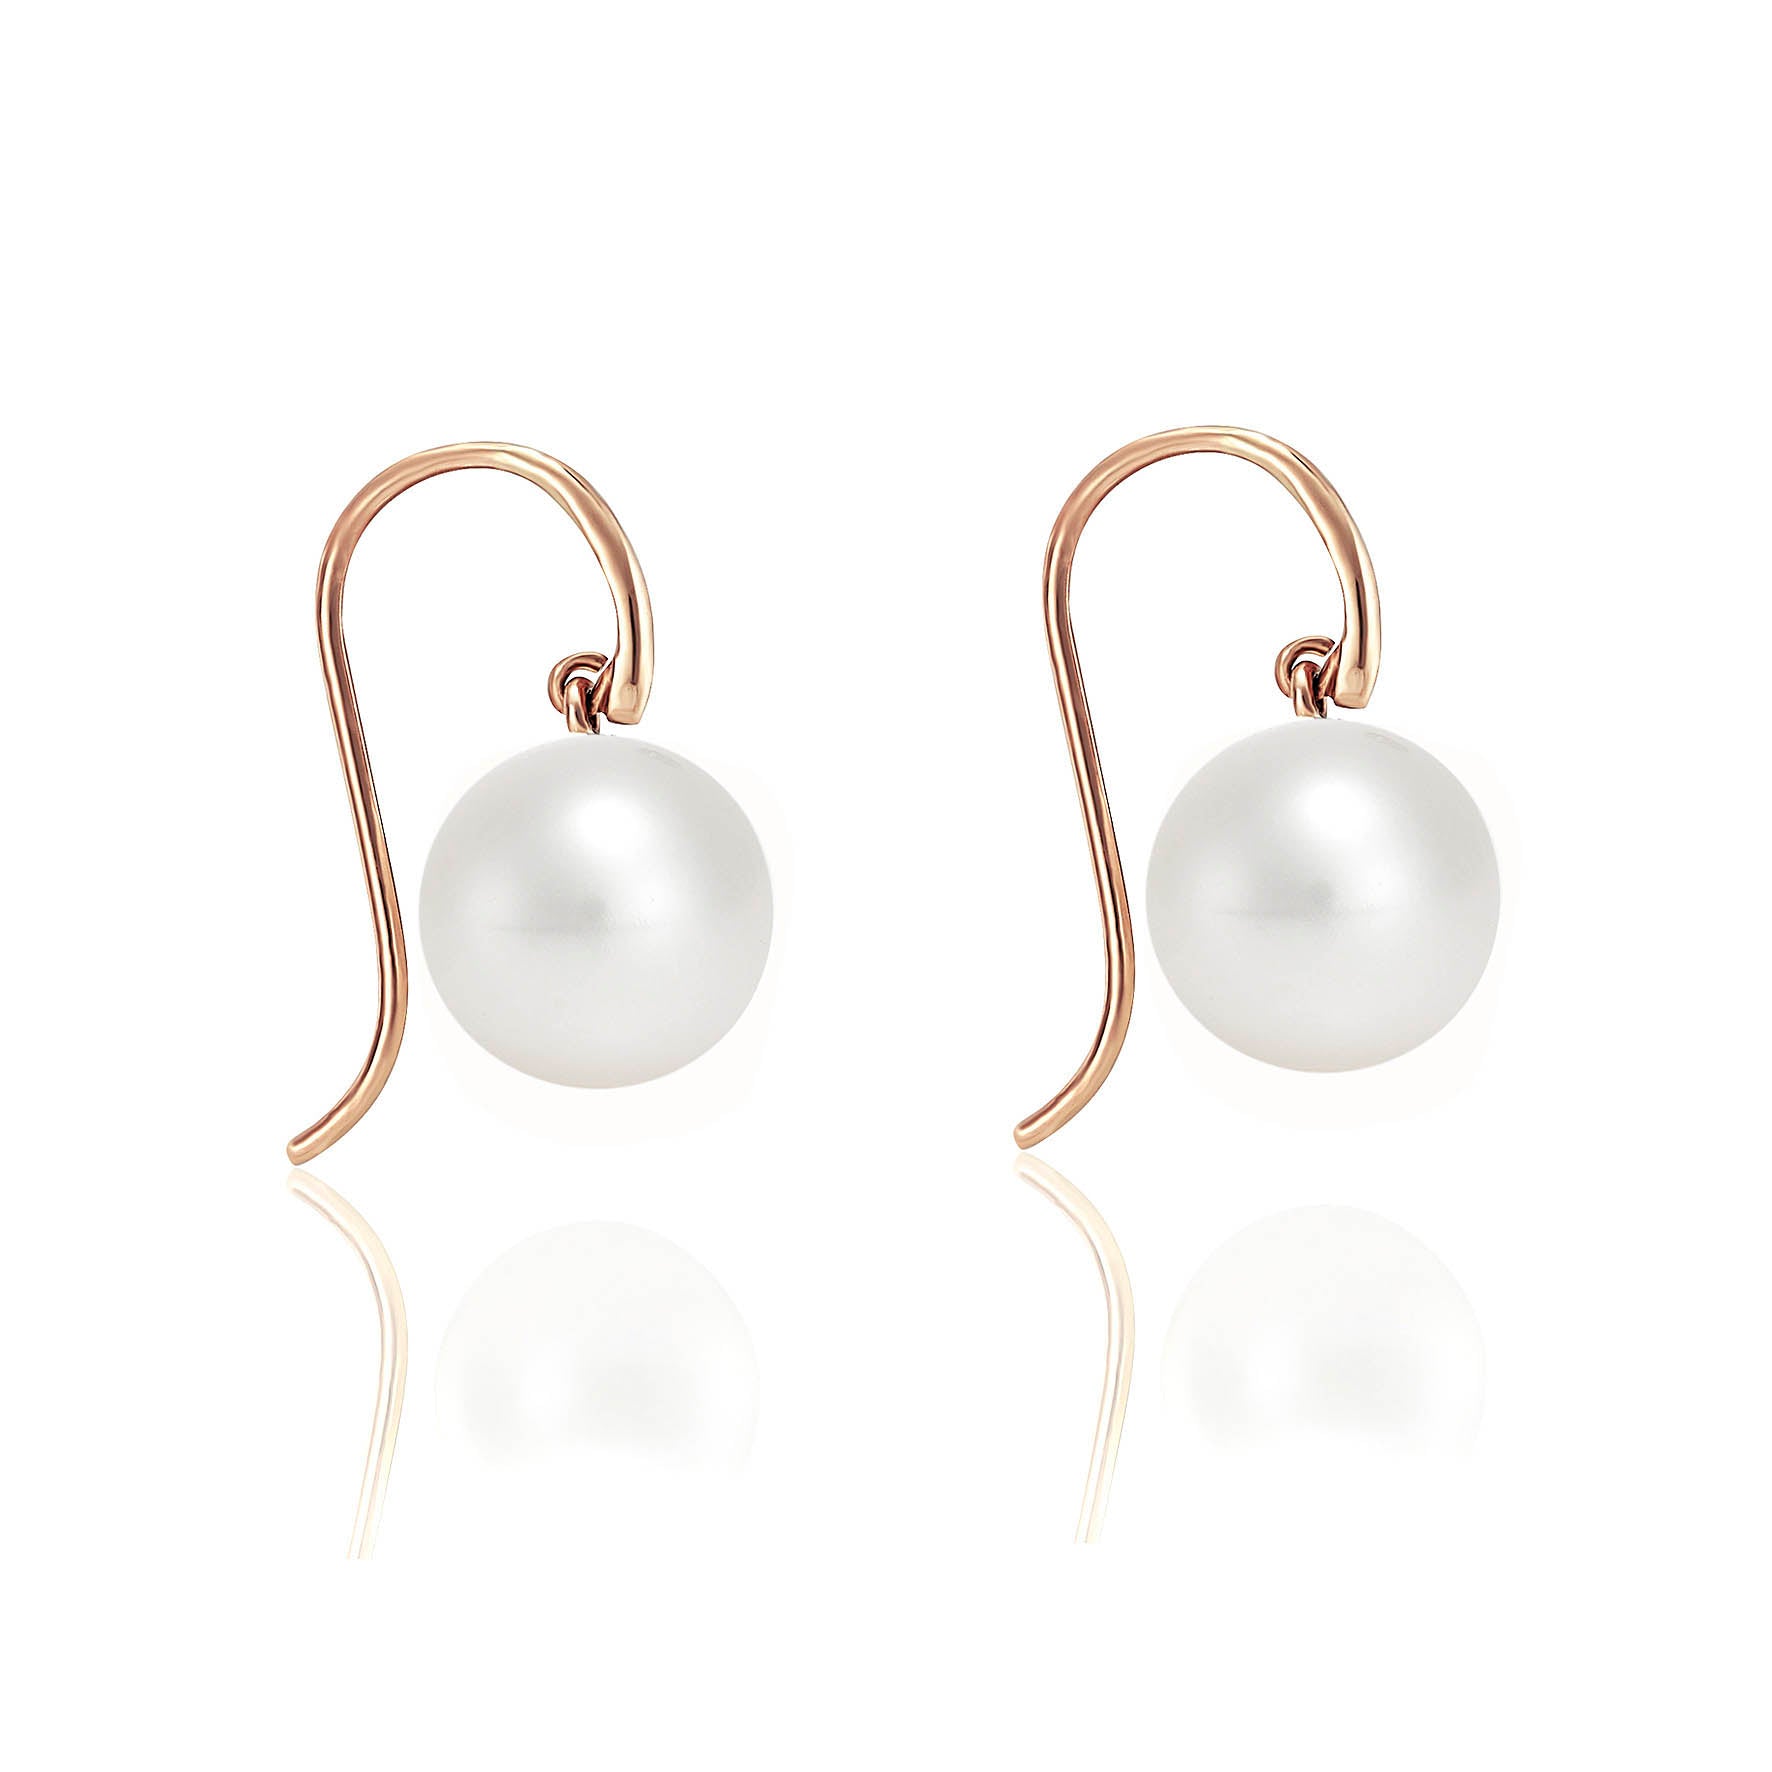 Palomino South Sea Pearl Earrings with 18ct Rose Gold Shepherds Hooks